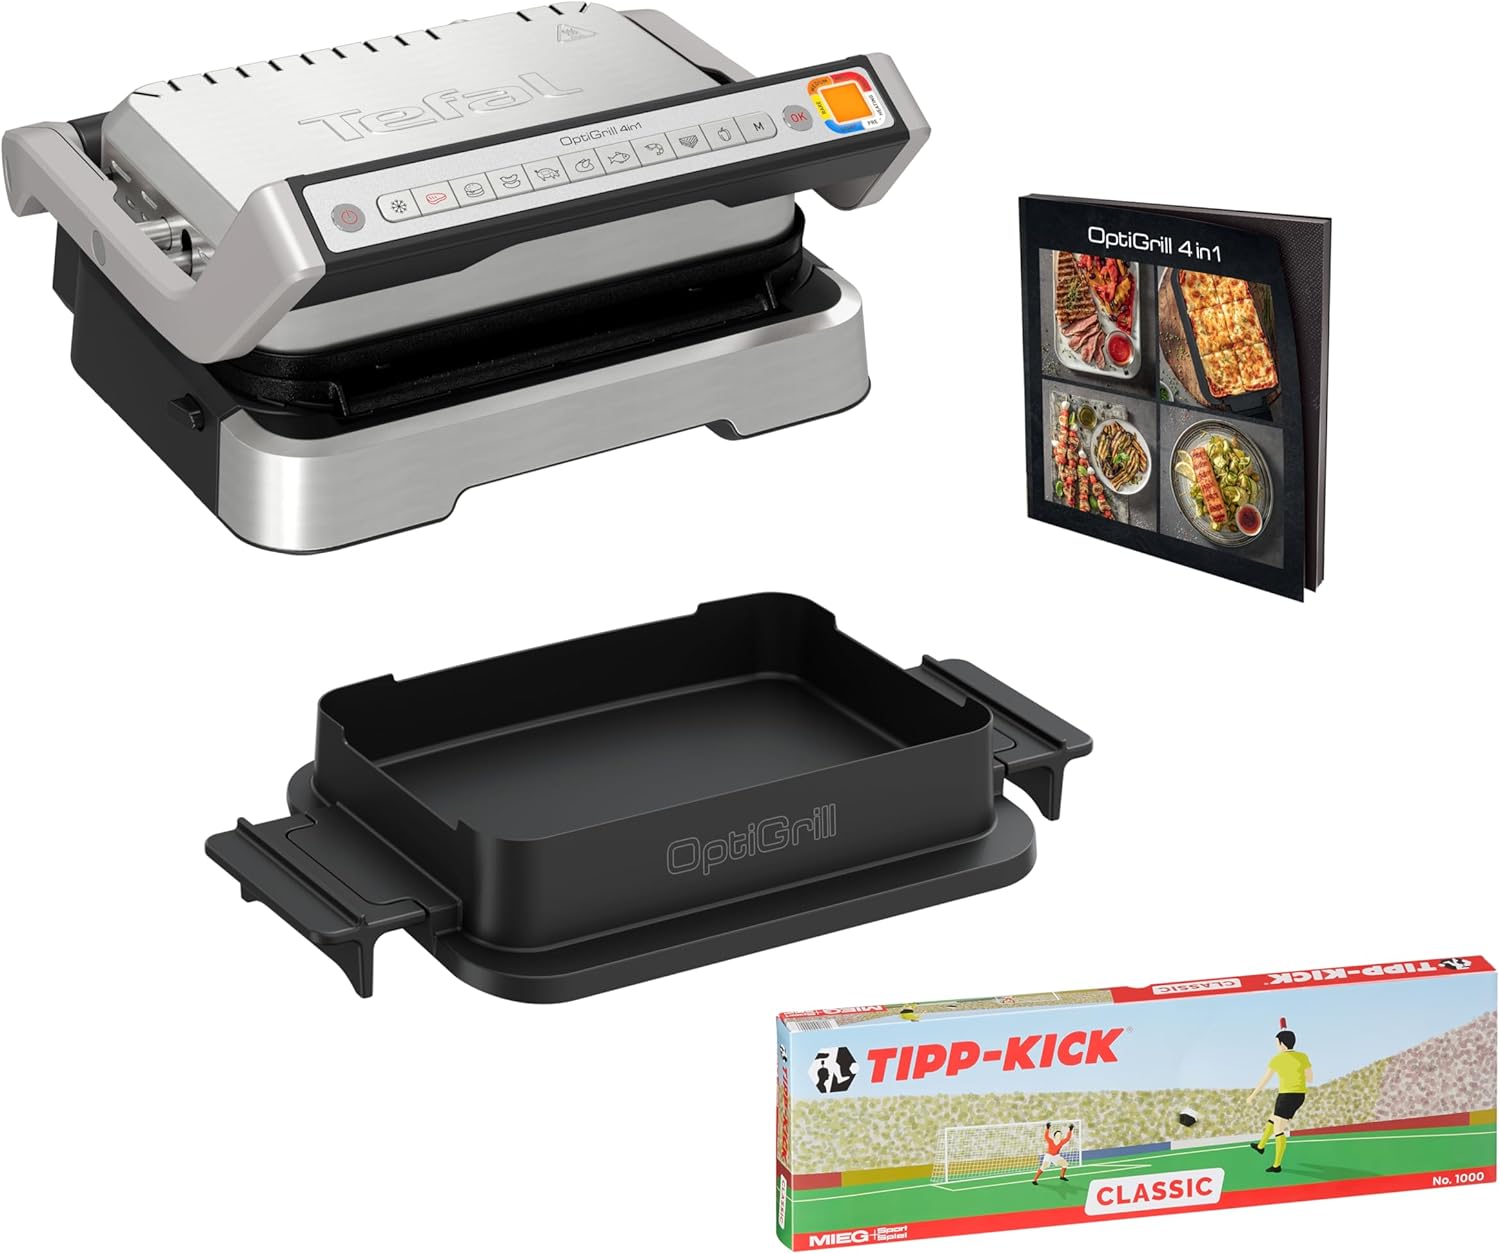 Tefal OptiGrill GC774D.TK 4-in-1 Tipp-Kick Edition Contact Grill, BBQ, Oven, Complete Meal, 9 Automatic Programs, Includes Baking Tray and Tip-Kick Game, Silver